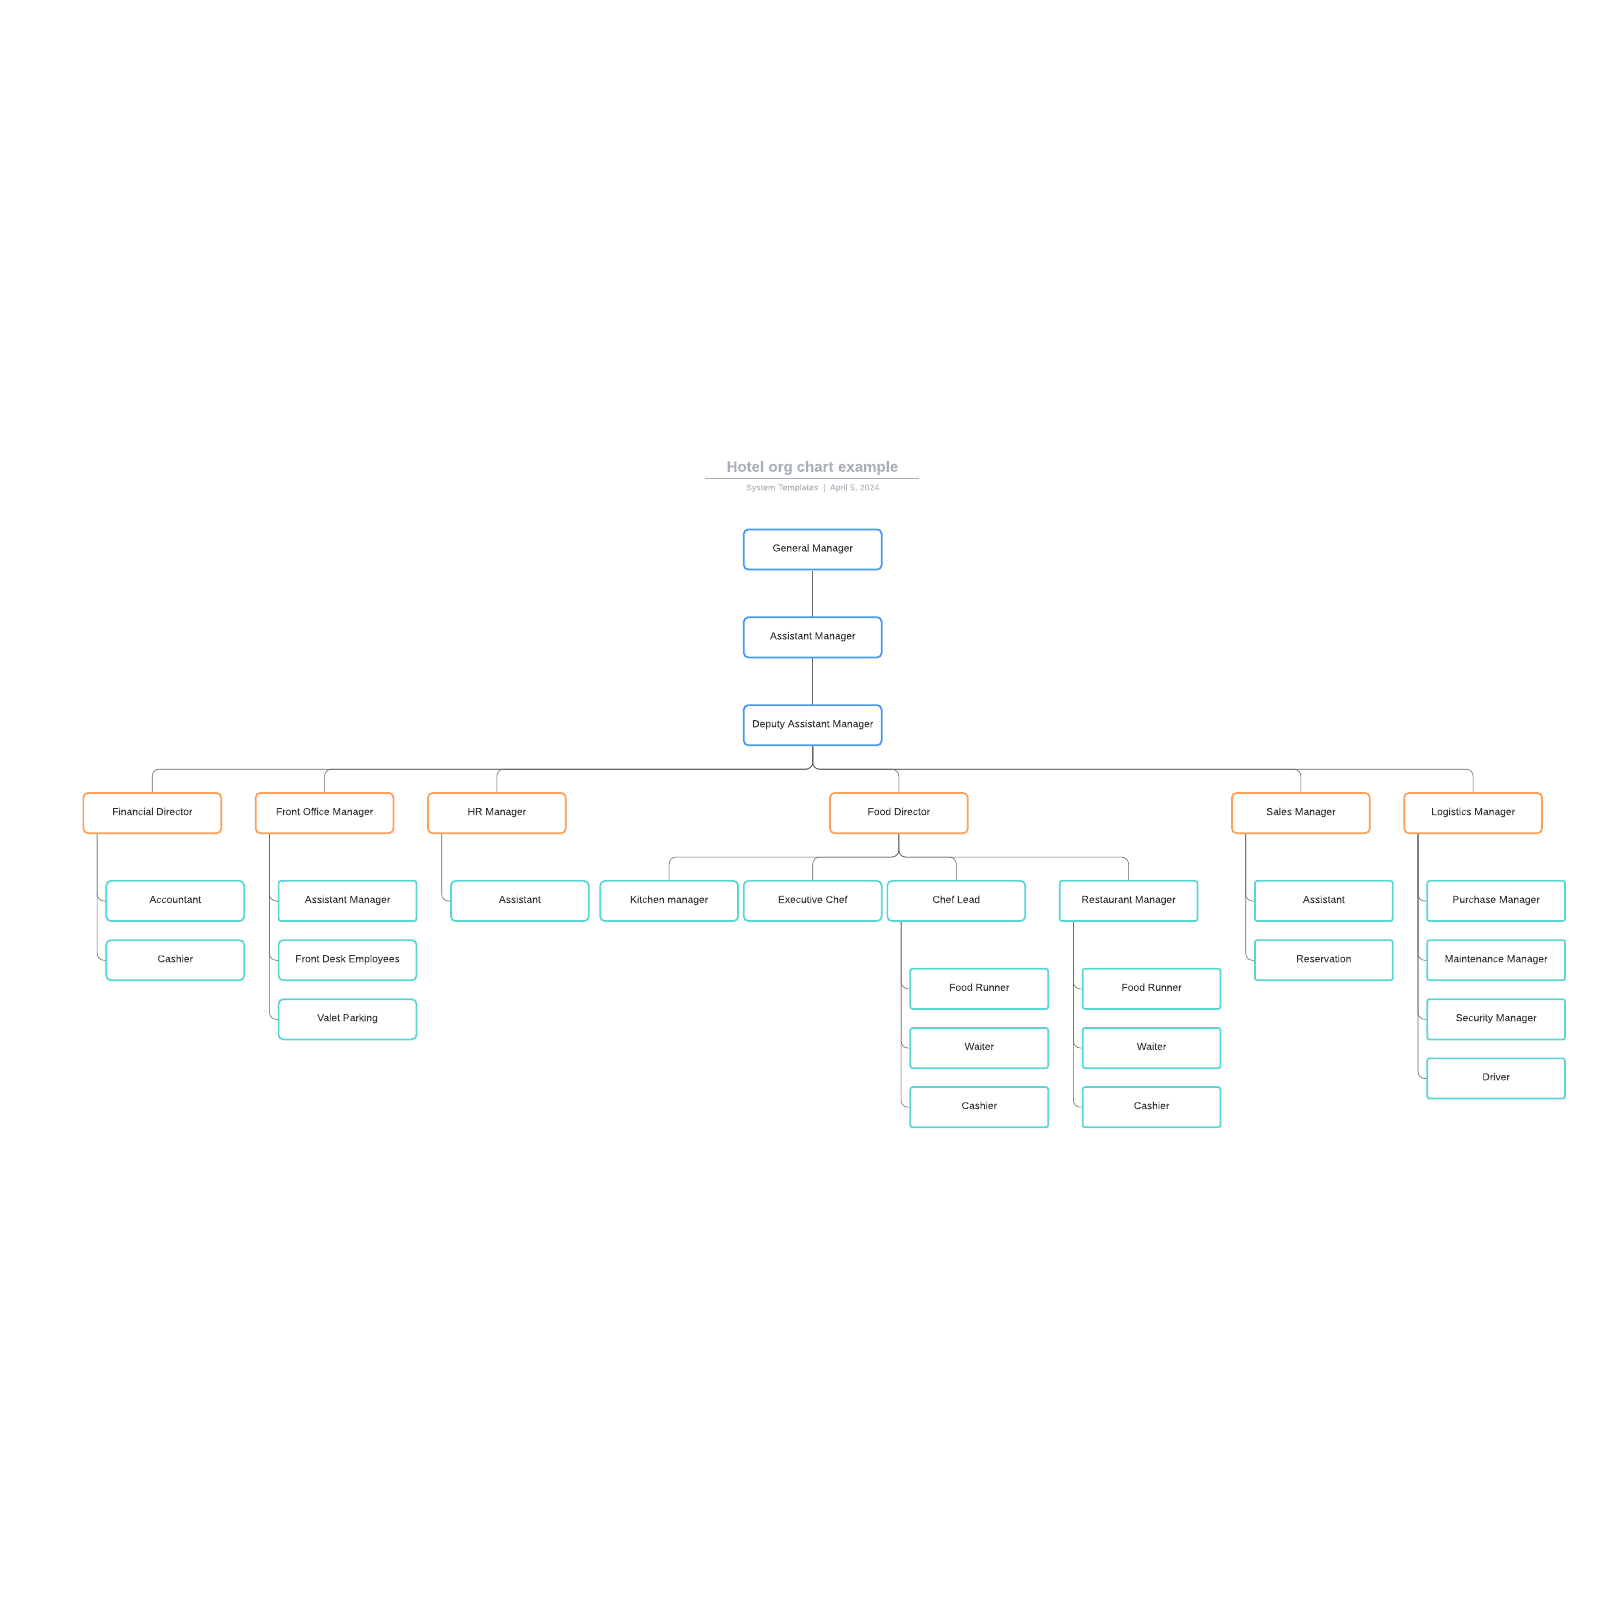 Hotel org chart example example